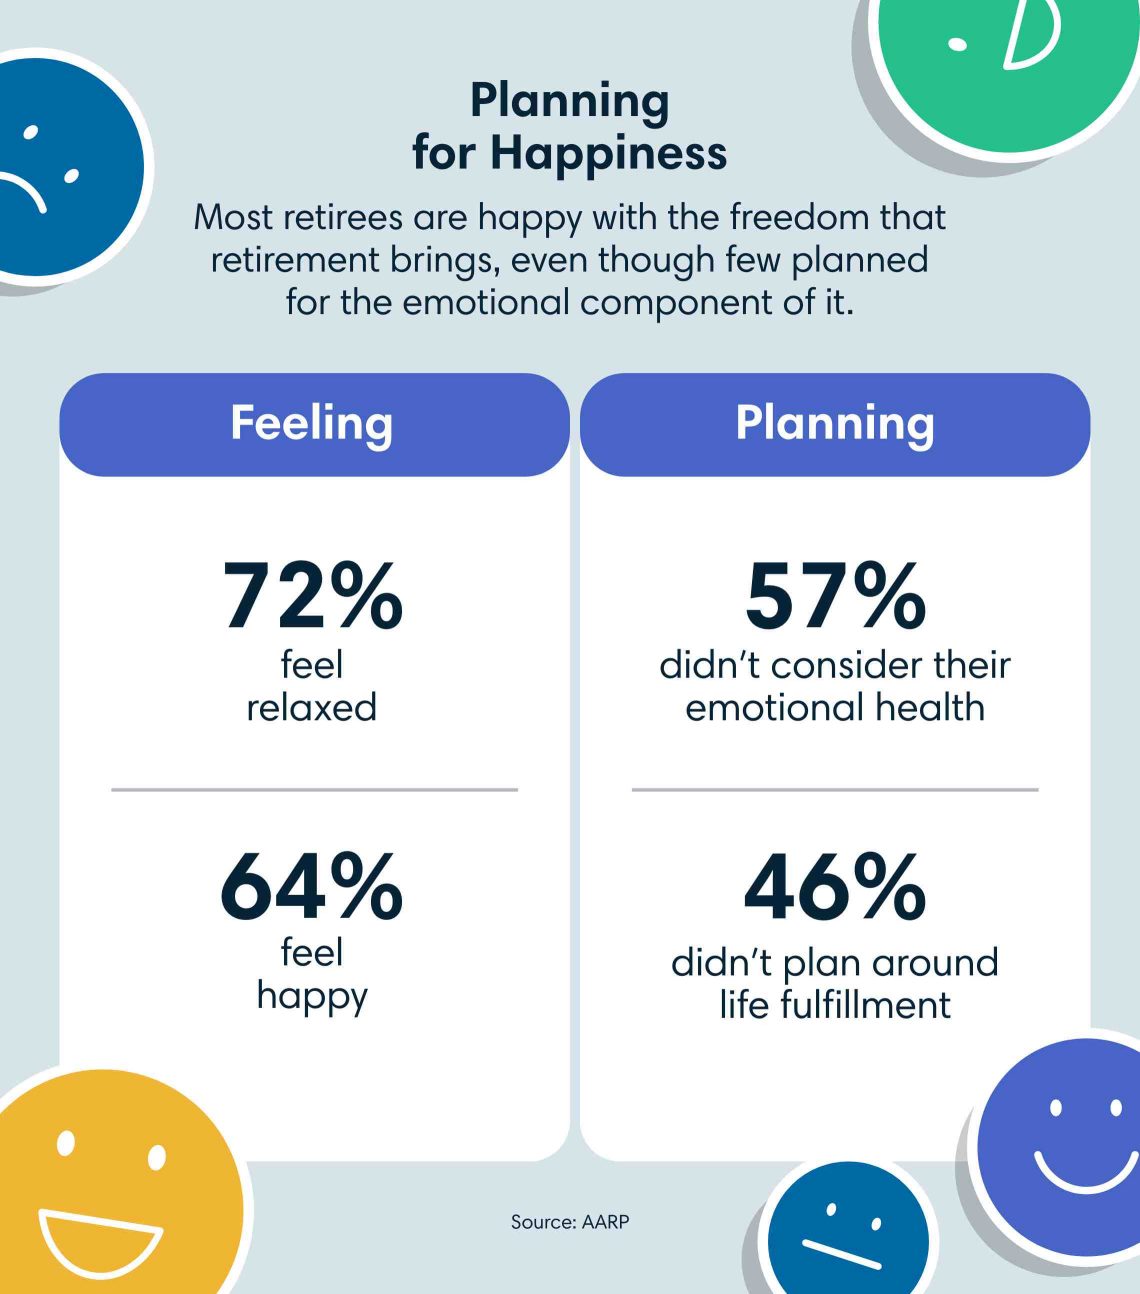 Planning for happiness. Most retirees are happy with the freedom that retirement brings, even though few planned for the emotional component of it. According to the AARP, 72 percent feel relaxed, 64 percent feel happy, 57 percent didn't consider their emotional health and 46 percent didn't plan around life fulfillment.